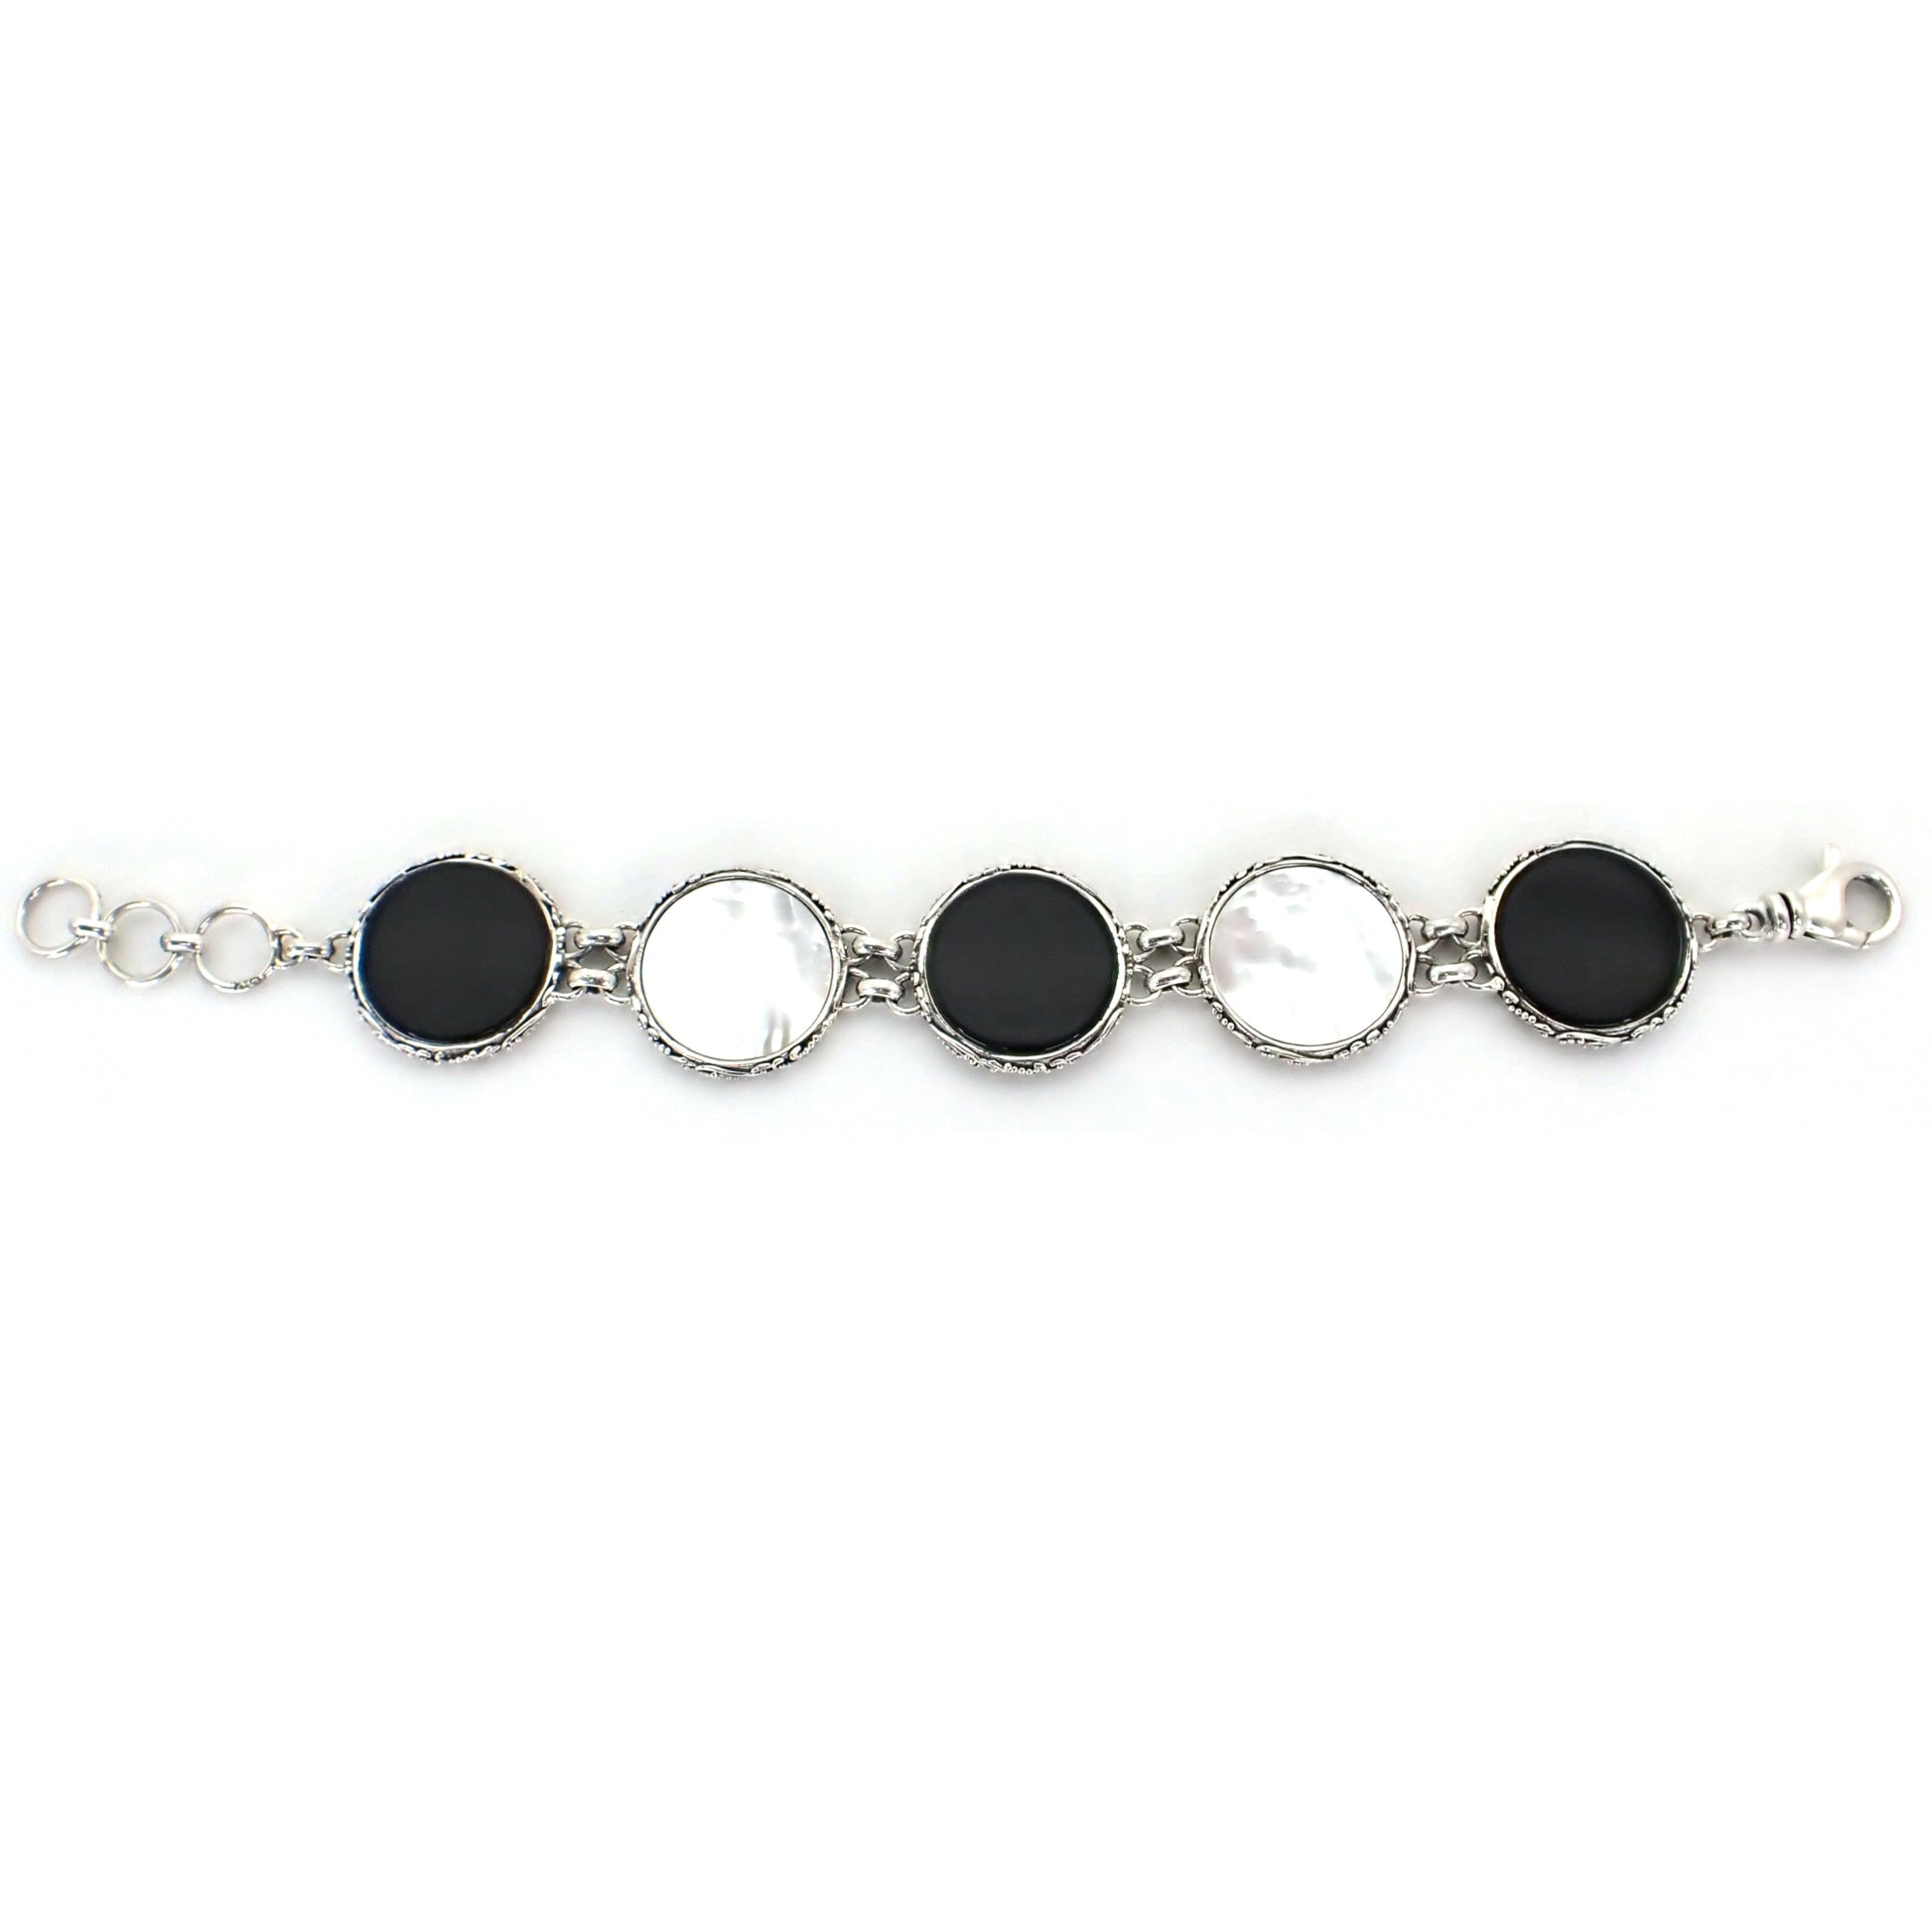 Bracelet with five links, comprised of three onyx discs and two mother of pearl discs and silver borders.